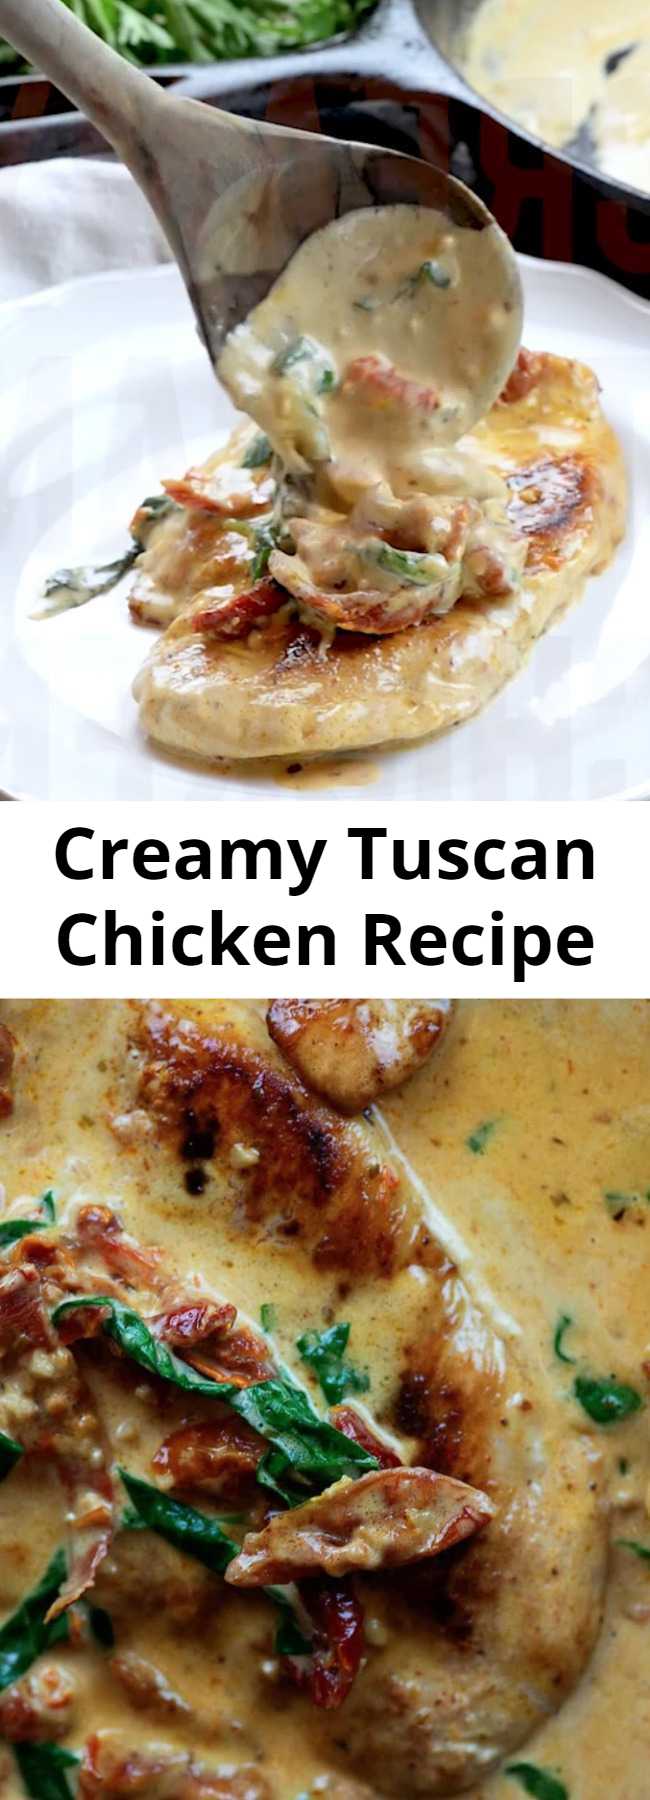 Creamy Tuscan Chicken Recipe - Creamy Tuscan Chicken is a one-skillet dish that’s oh so rich and satisfying. It’s low carb, family friendly, and sure to be a hit thanks to that creamy flavorful sauce! #lowcarb #keto #chicken #recipes